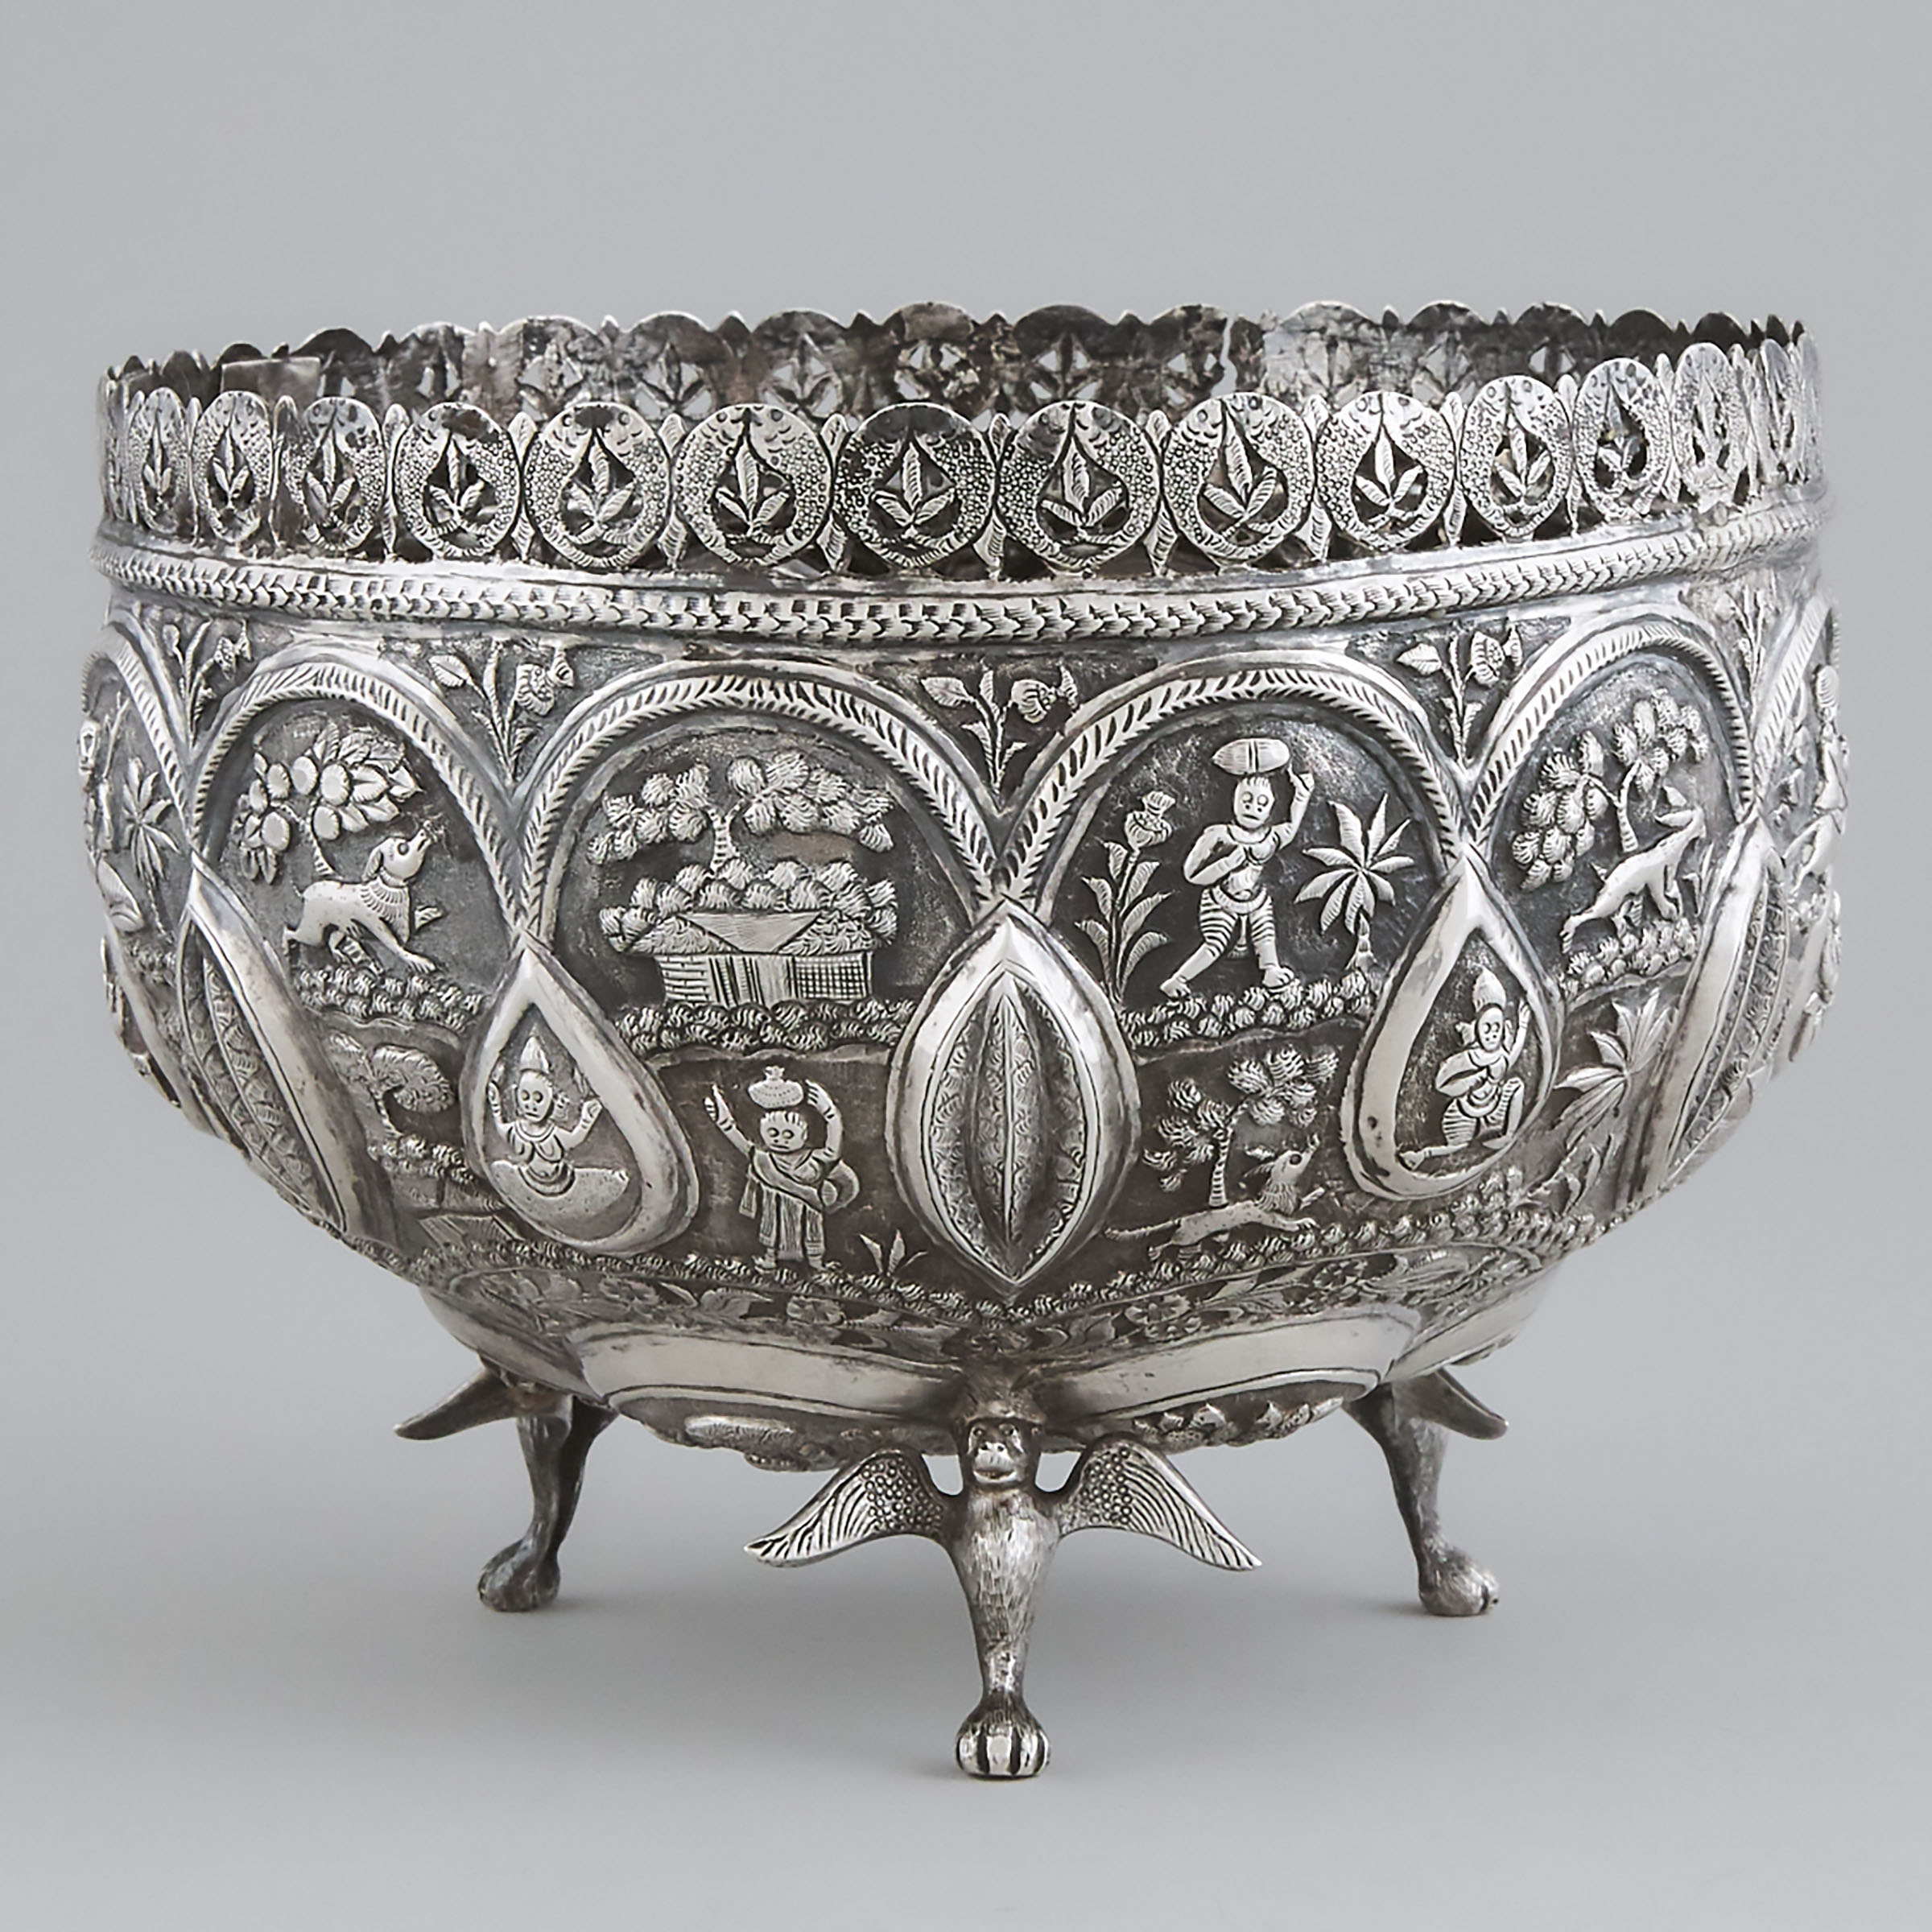 Indonesian Silver Three-Footed Bowl, late 19th century